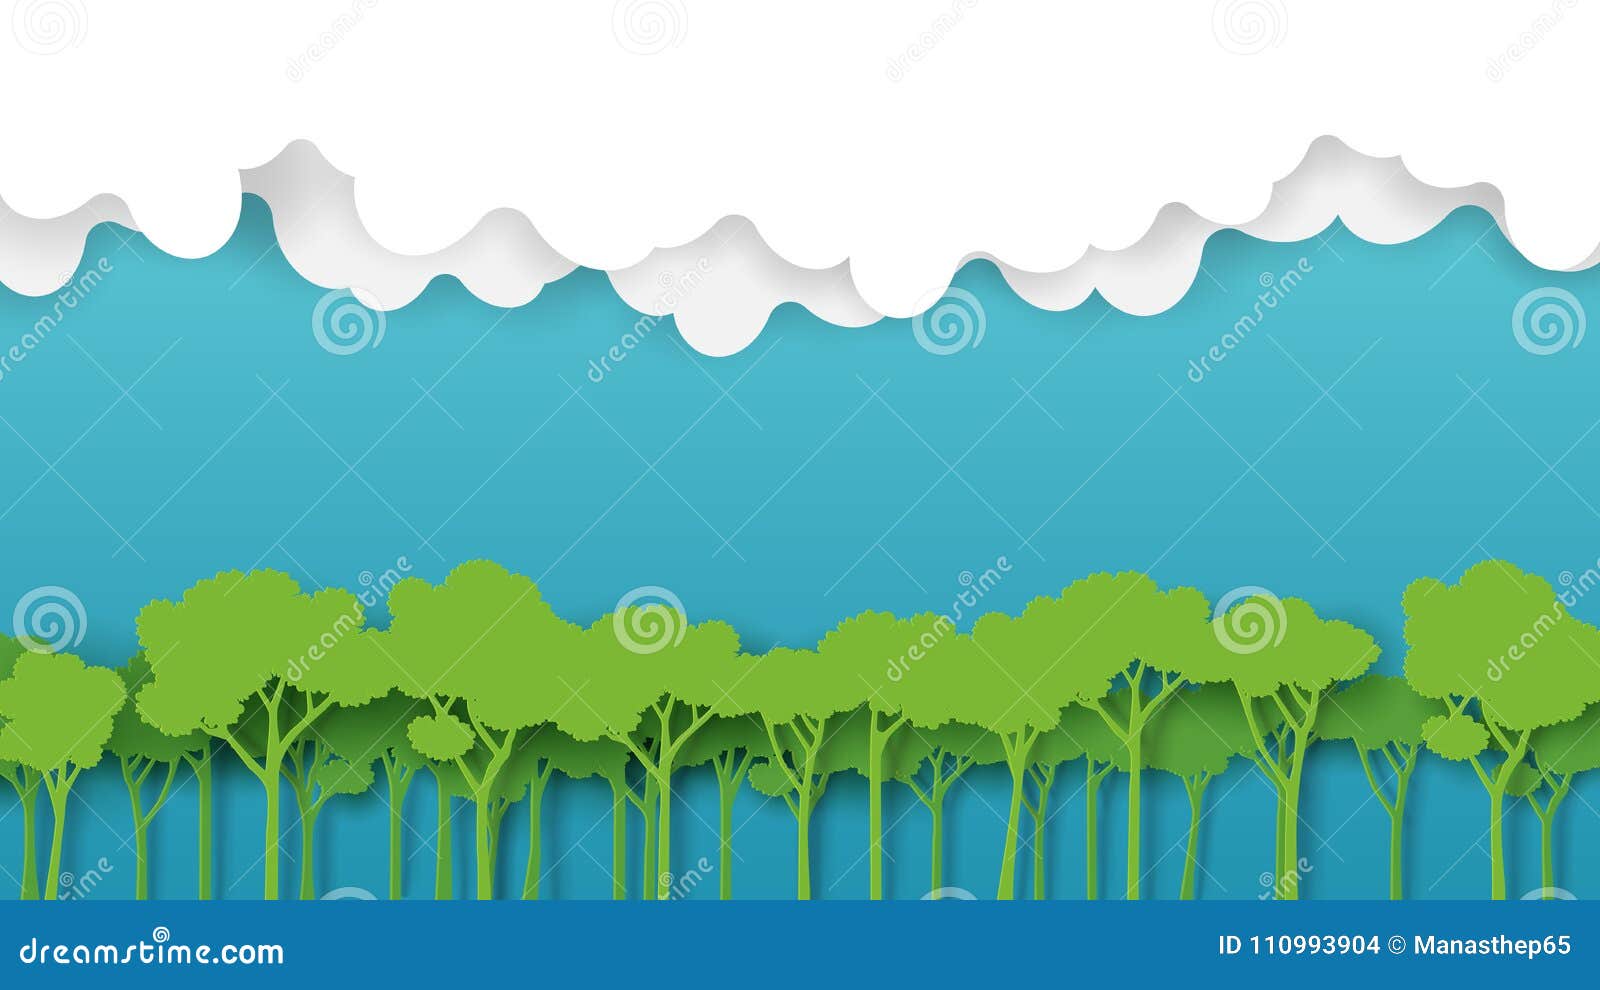 green forest and blue sky paper art style